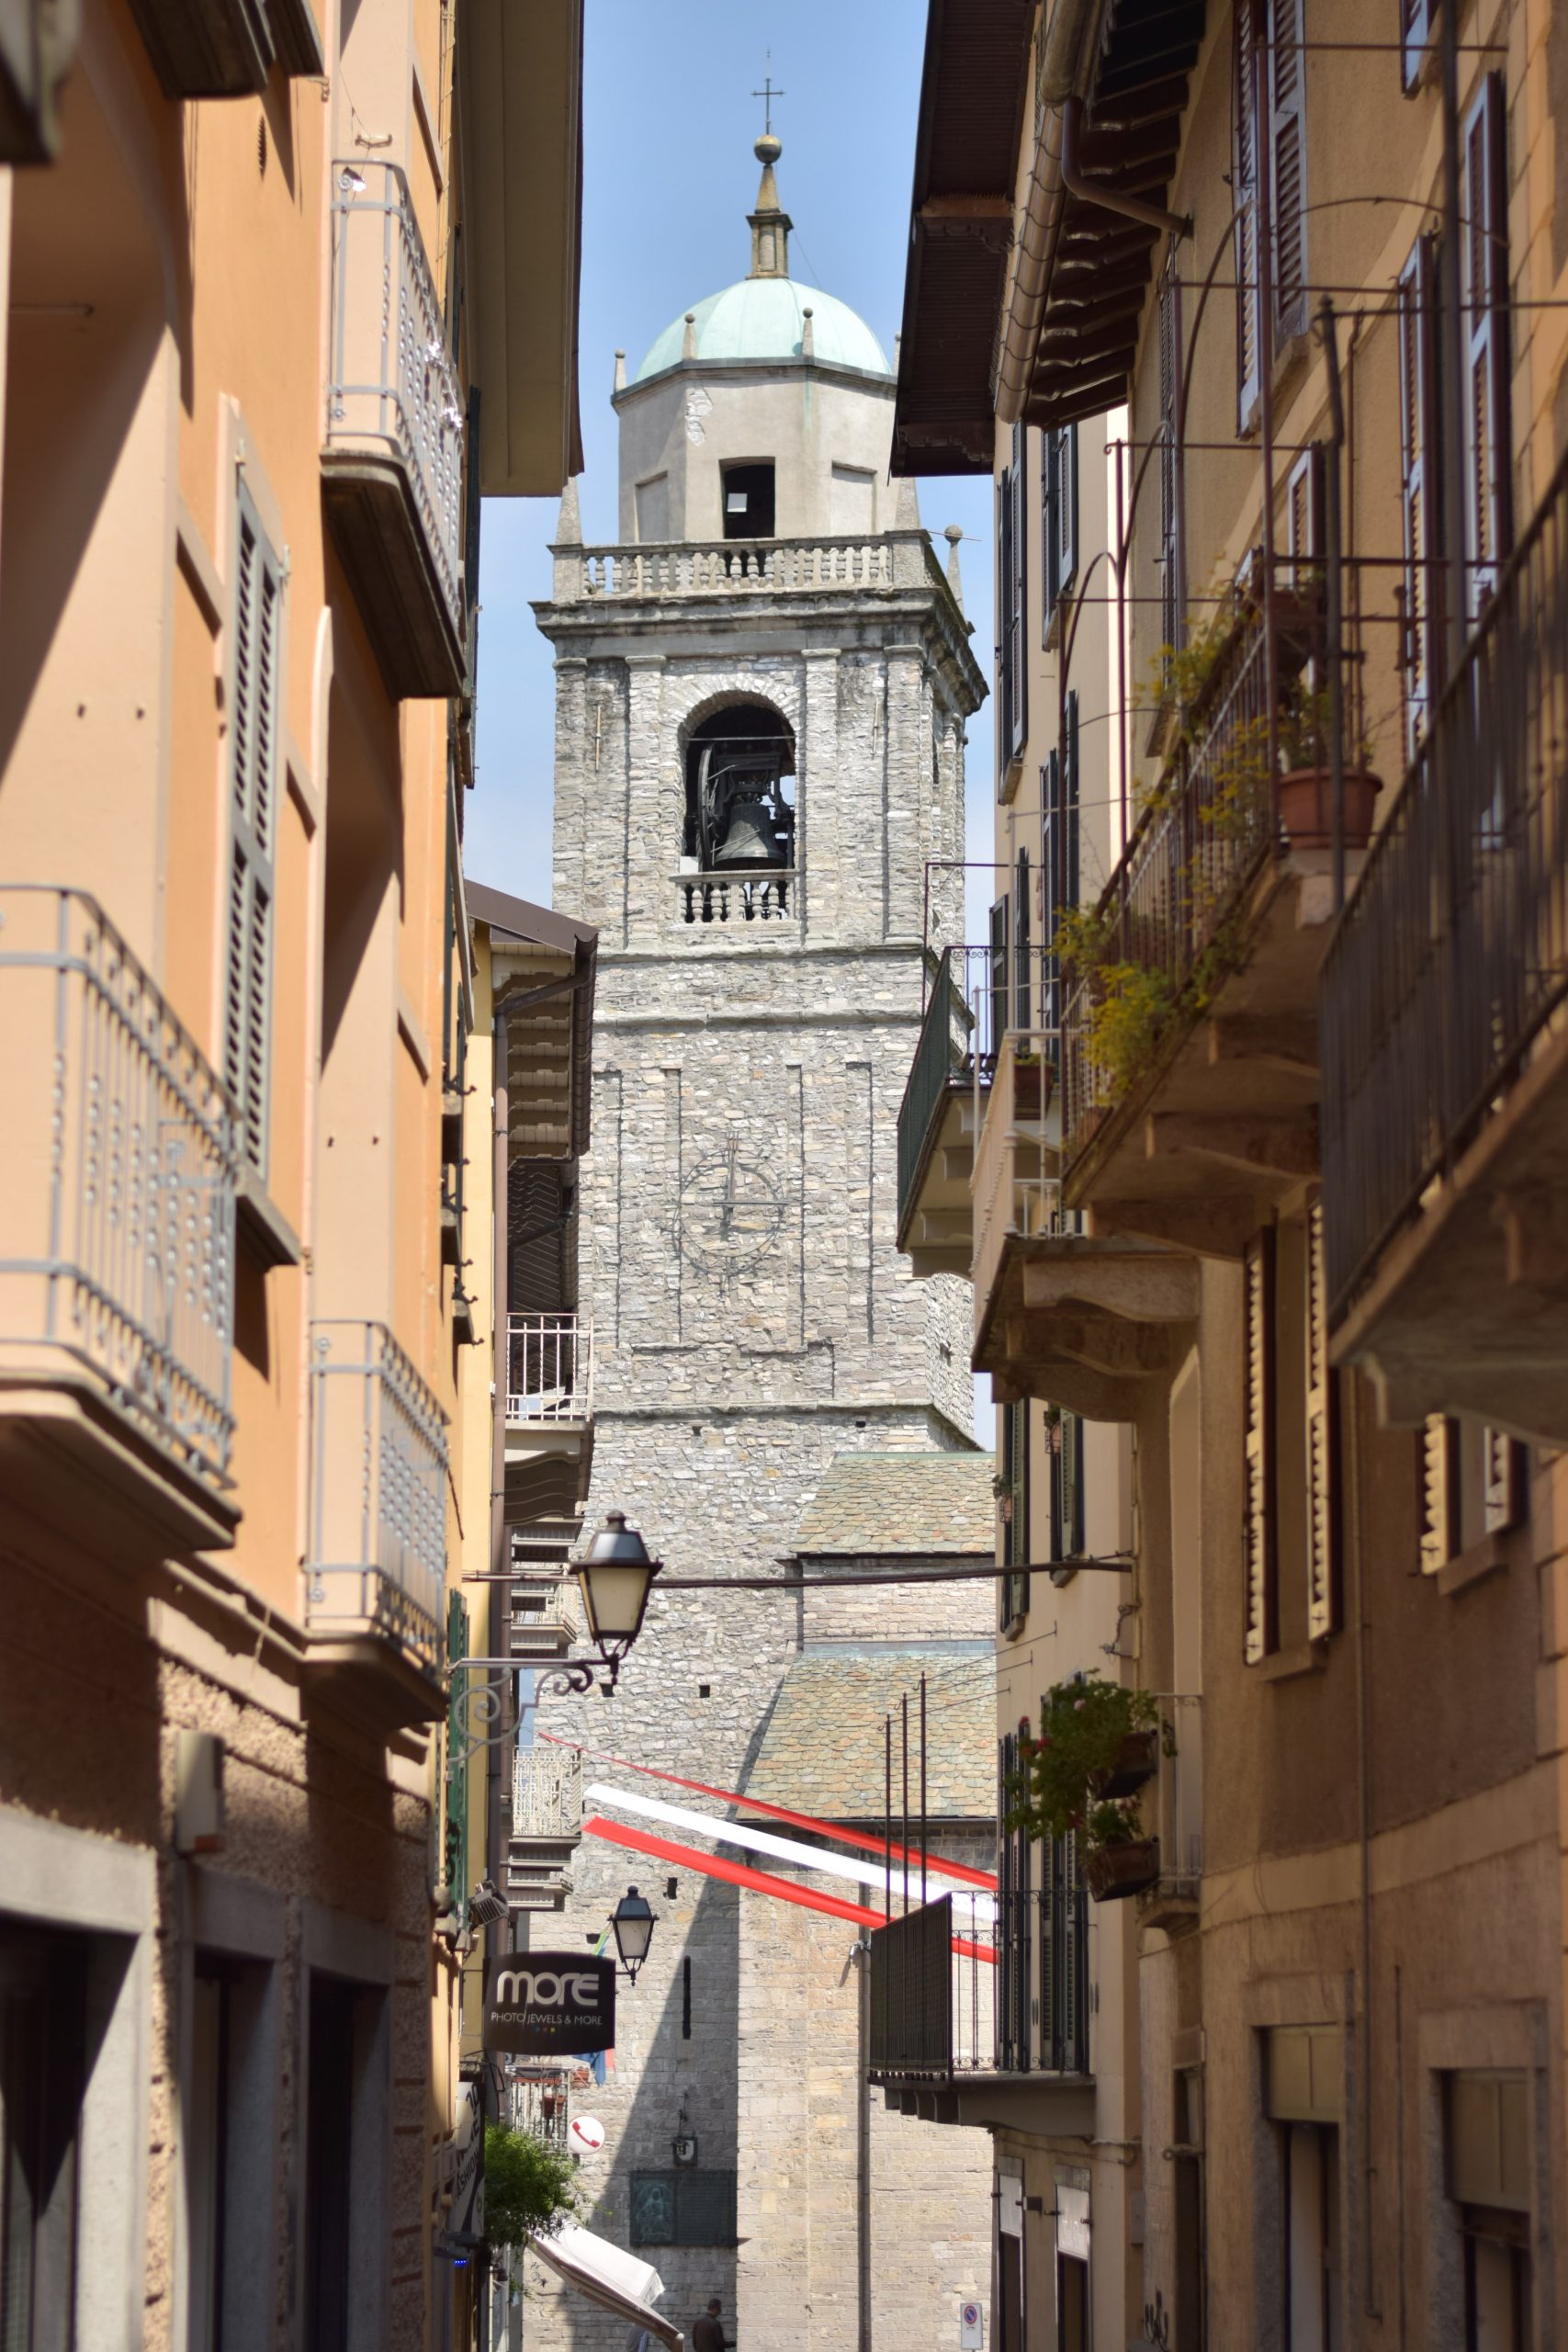 A narrow street of terracotta buildings with balconies and french shutters with a tall bell tower at the end